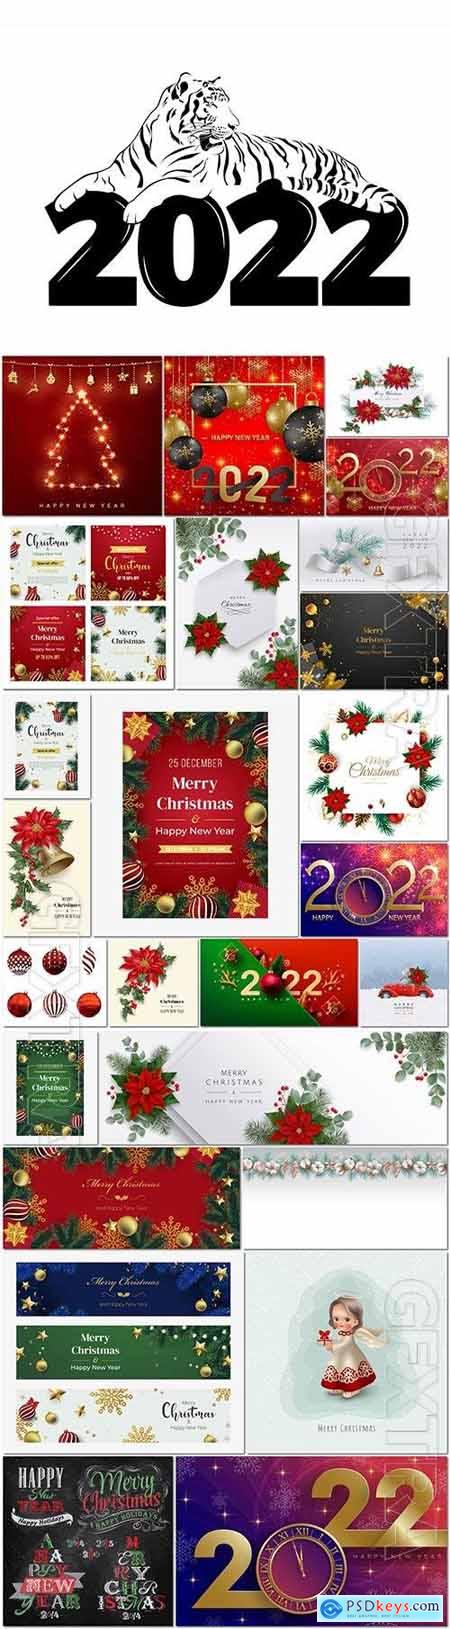 Christmas and New Year set in vector, Christmas toys, Santa, garlands, holiday decorations